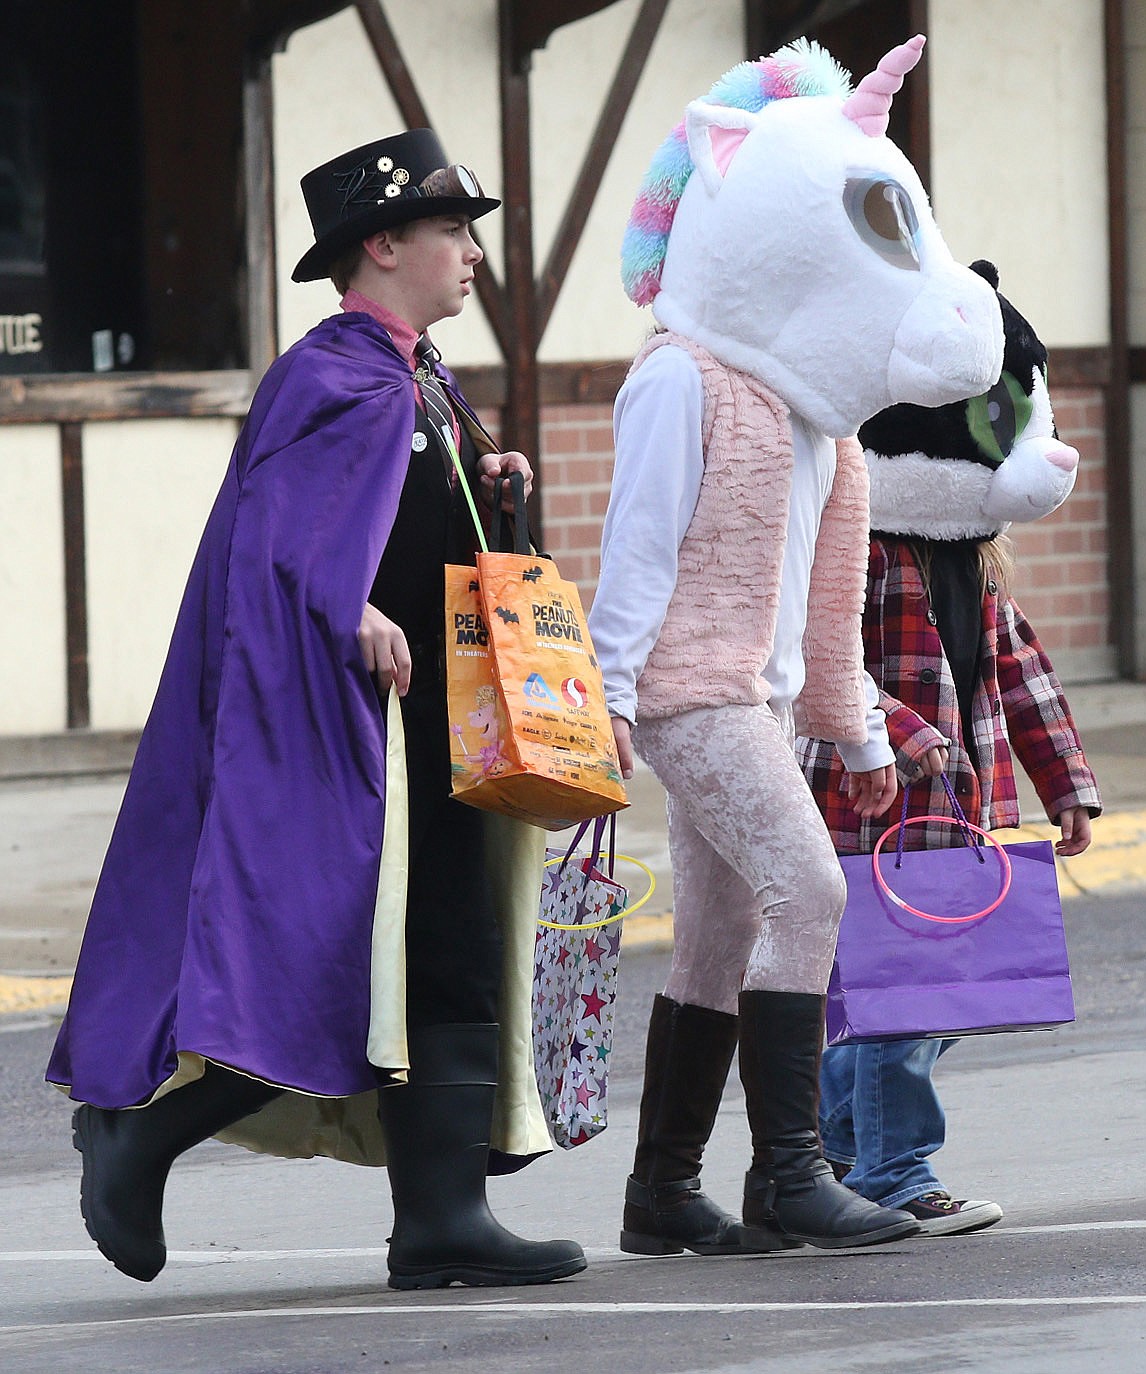 Aaron Thomas as a magician, Olivia Sanderson as a unicorn and Morgan Sanderson as a cat cross Mineral Avenue while trick-or-treating in Libby Wednesday evening. (John Blodgett/The Western News)